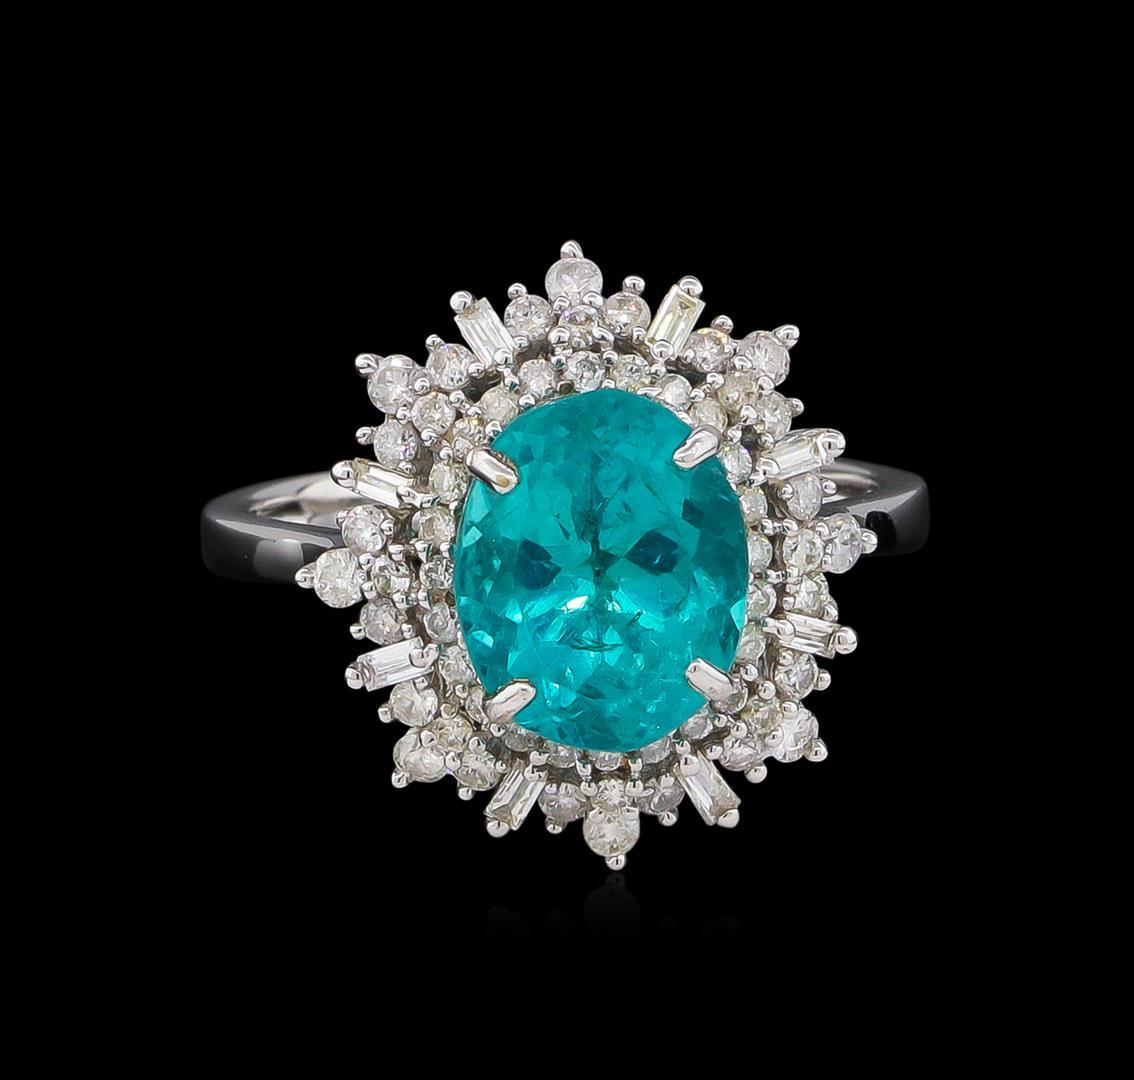 3.03 ctw Apatite and Diamond Ring - 14KT White Gold